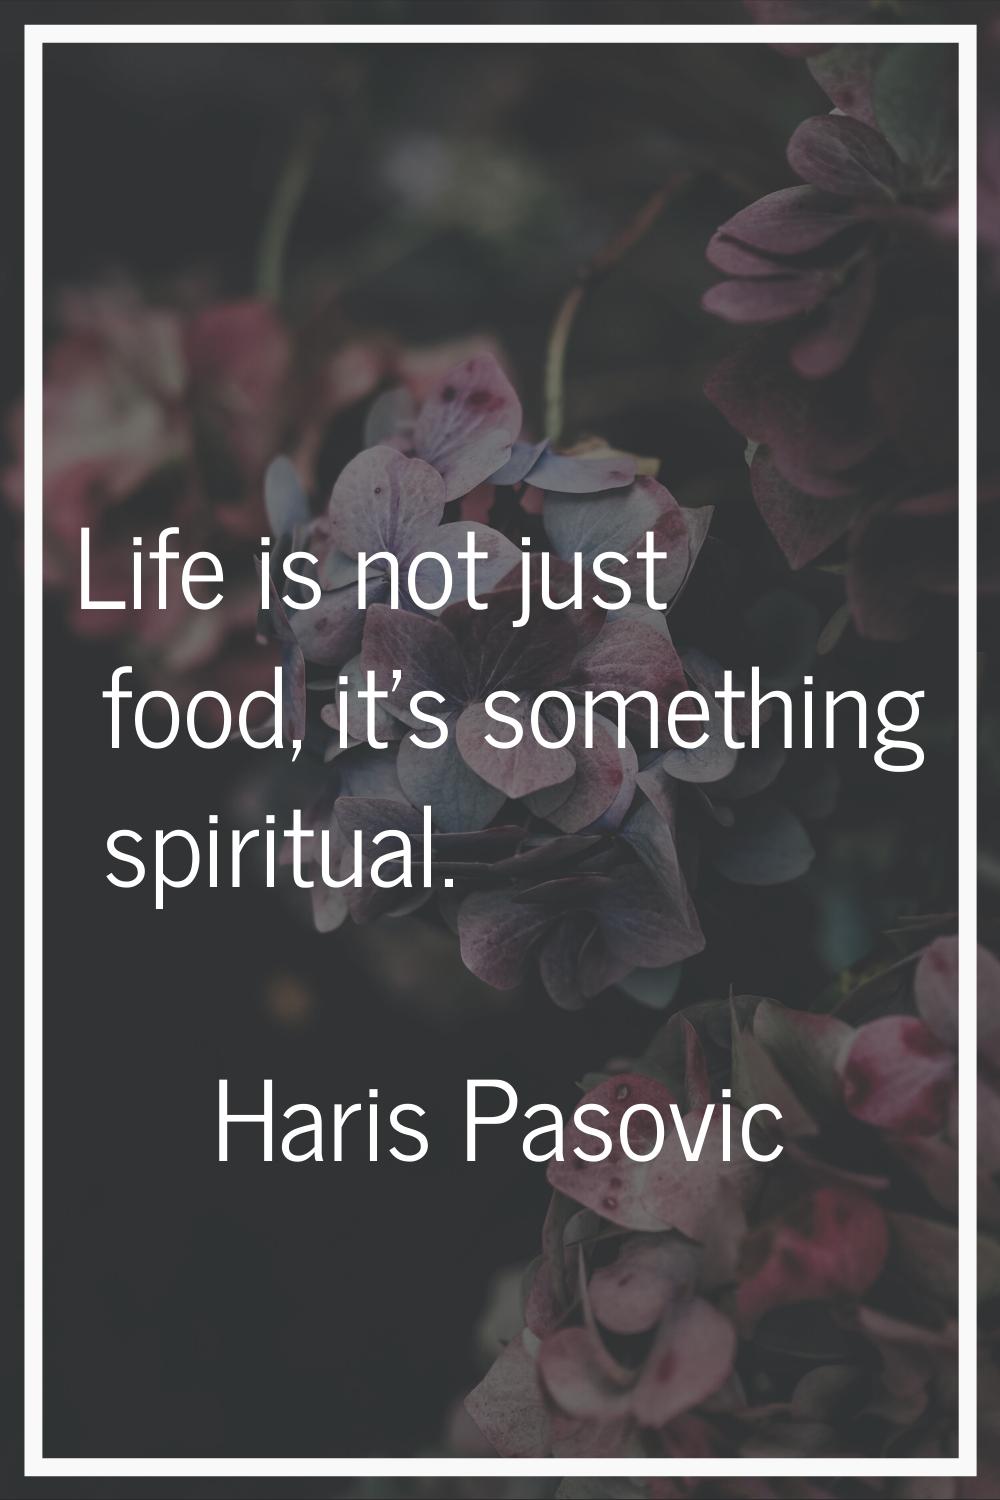 Life is not just food, it's something spiritual.